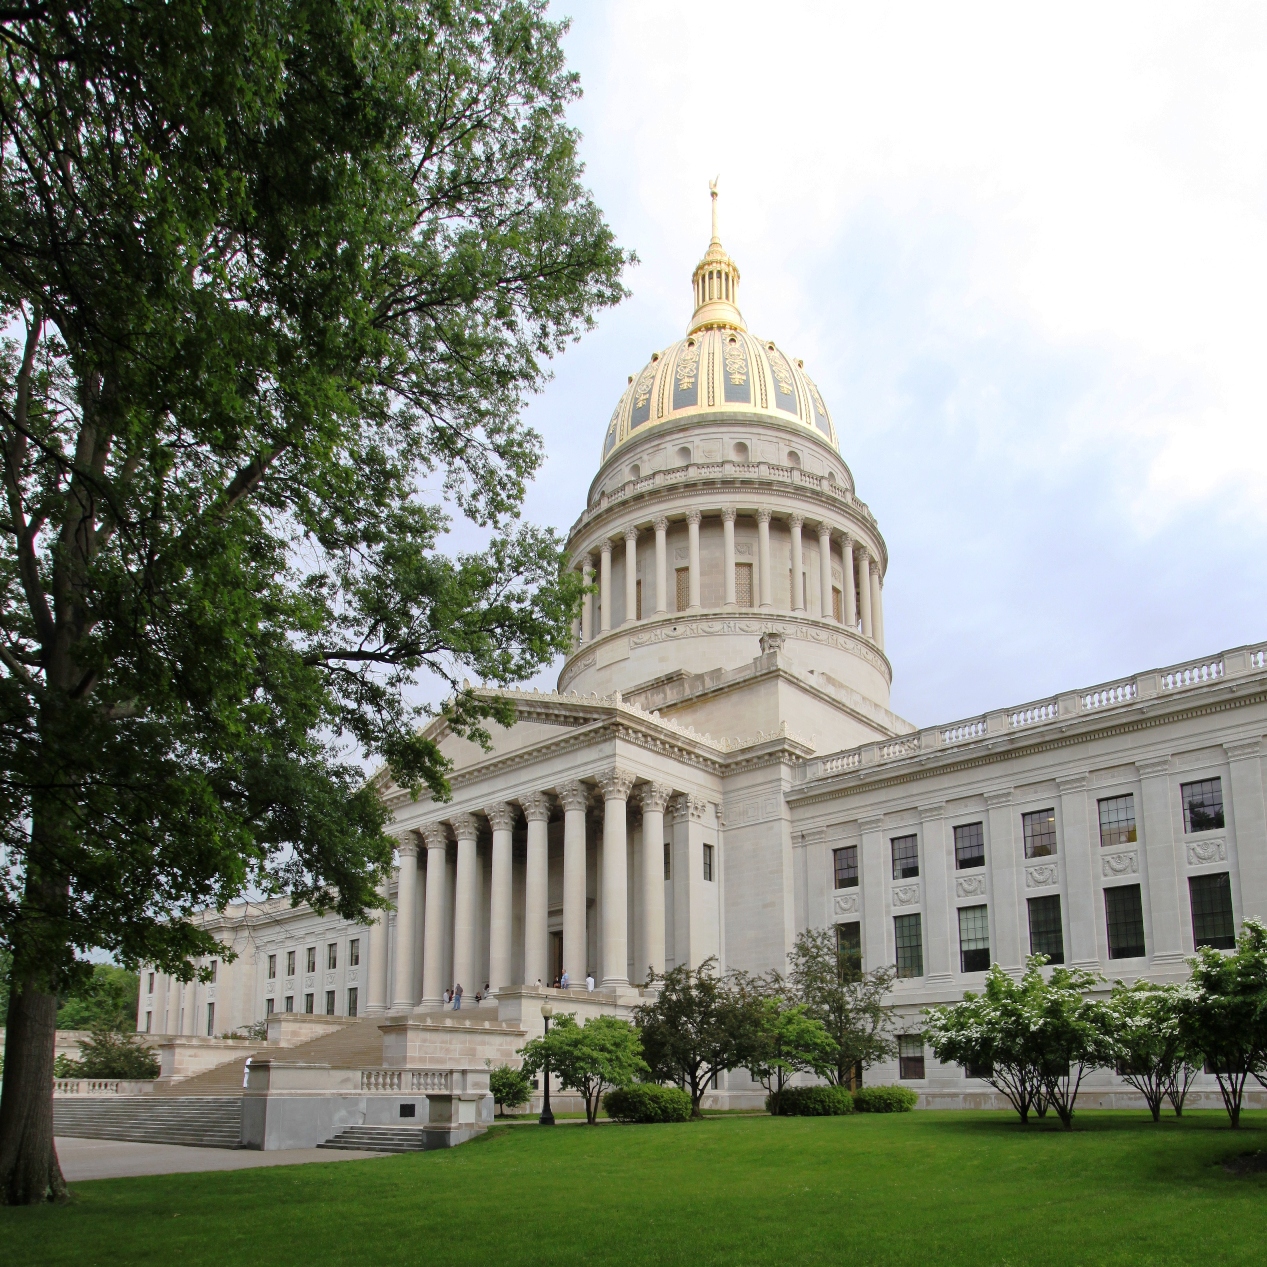 The West Virginia Capitol in Charleston, as seen in May 2011. (Accessed via Flickr creative commons/OZinOH)